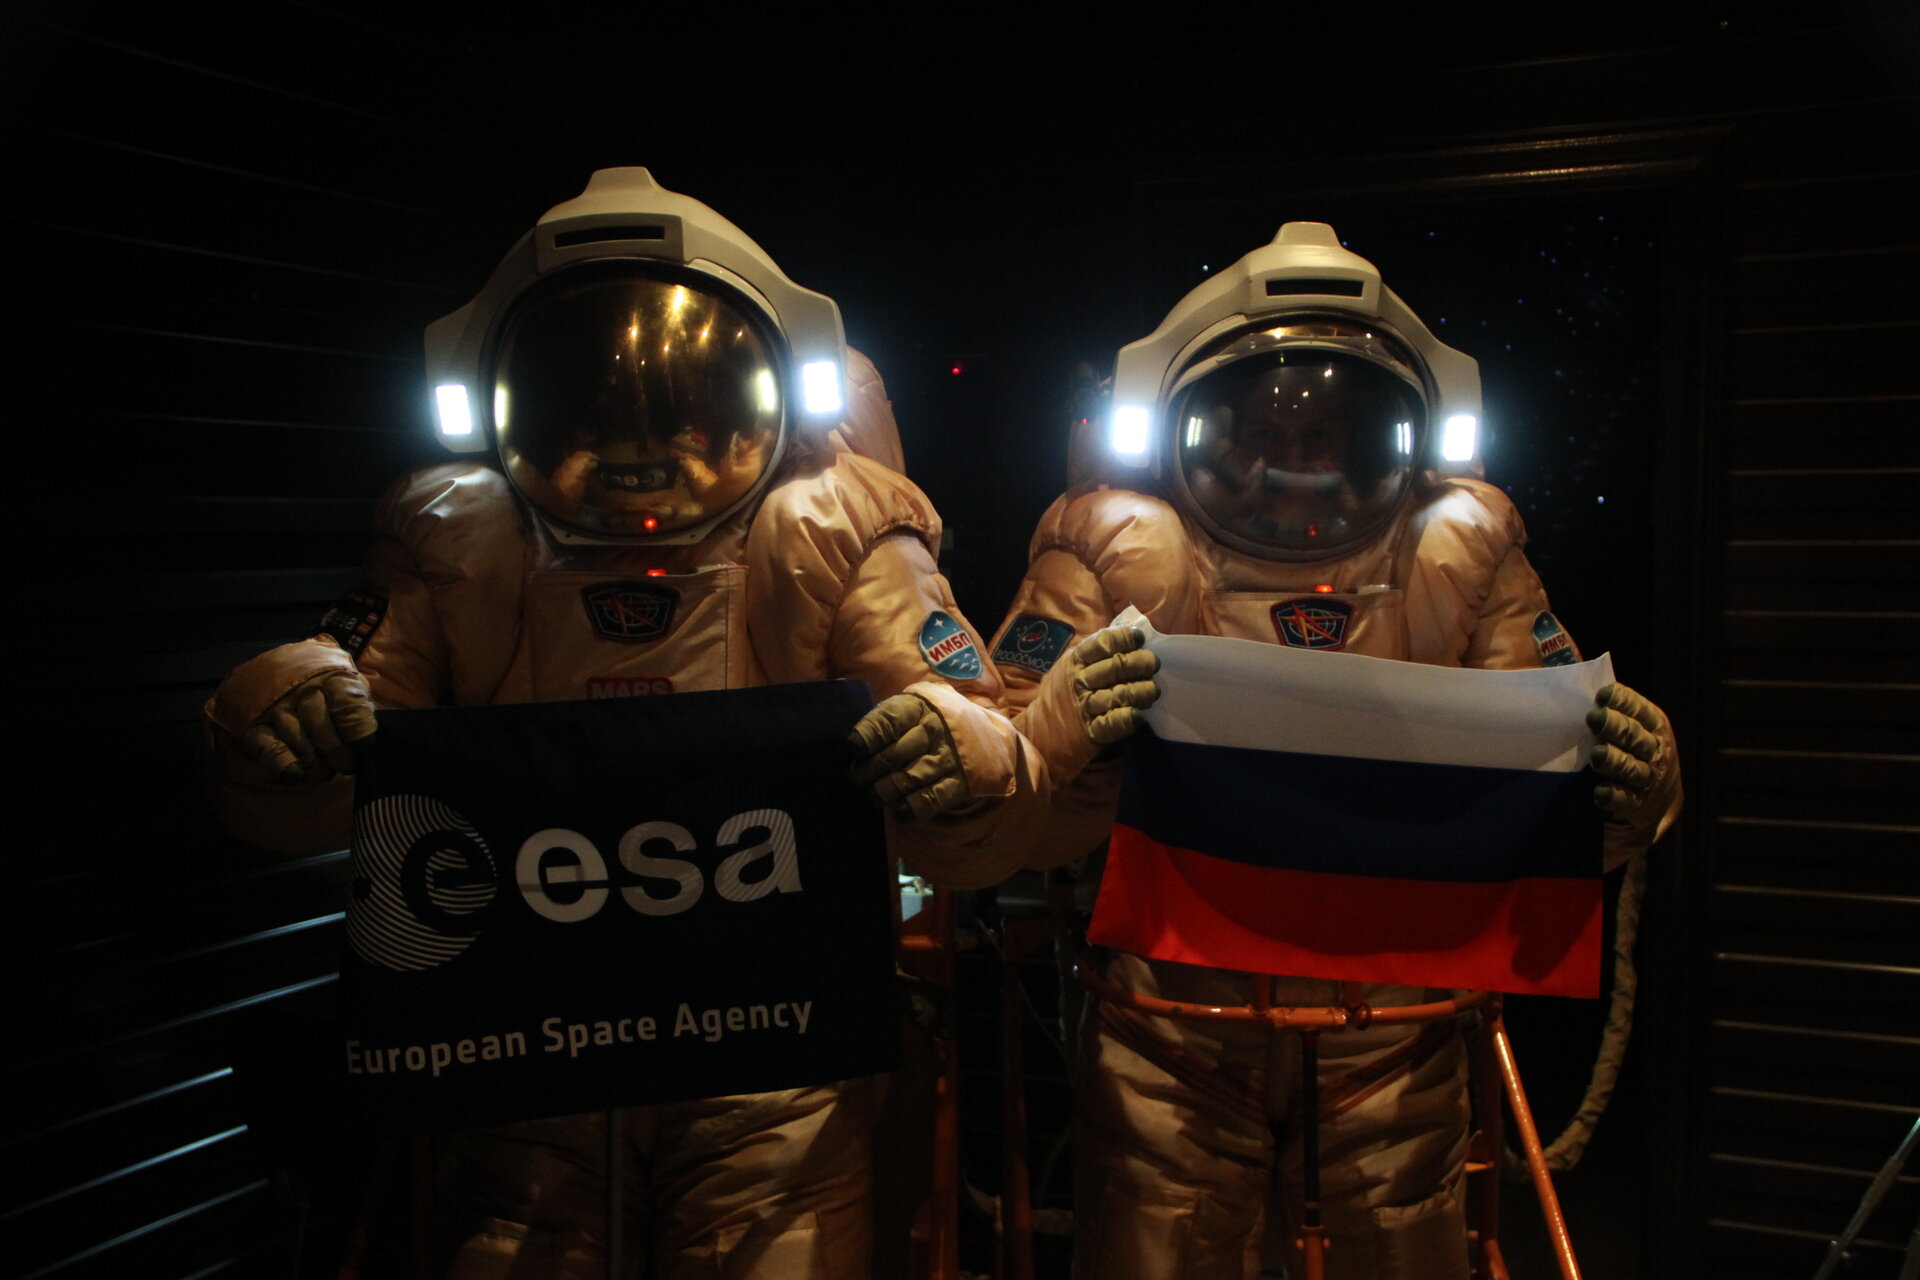 Diego and Alexandr in EVA suits